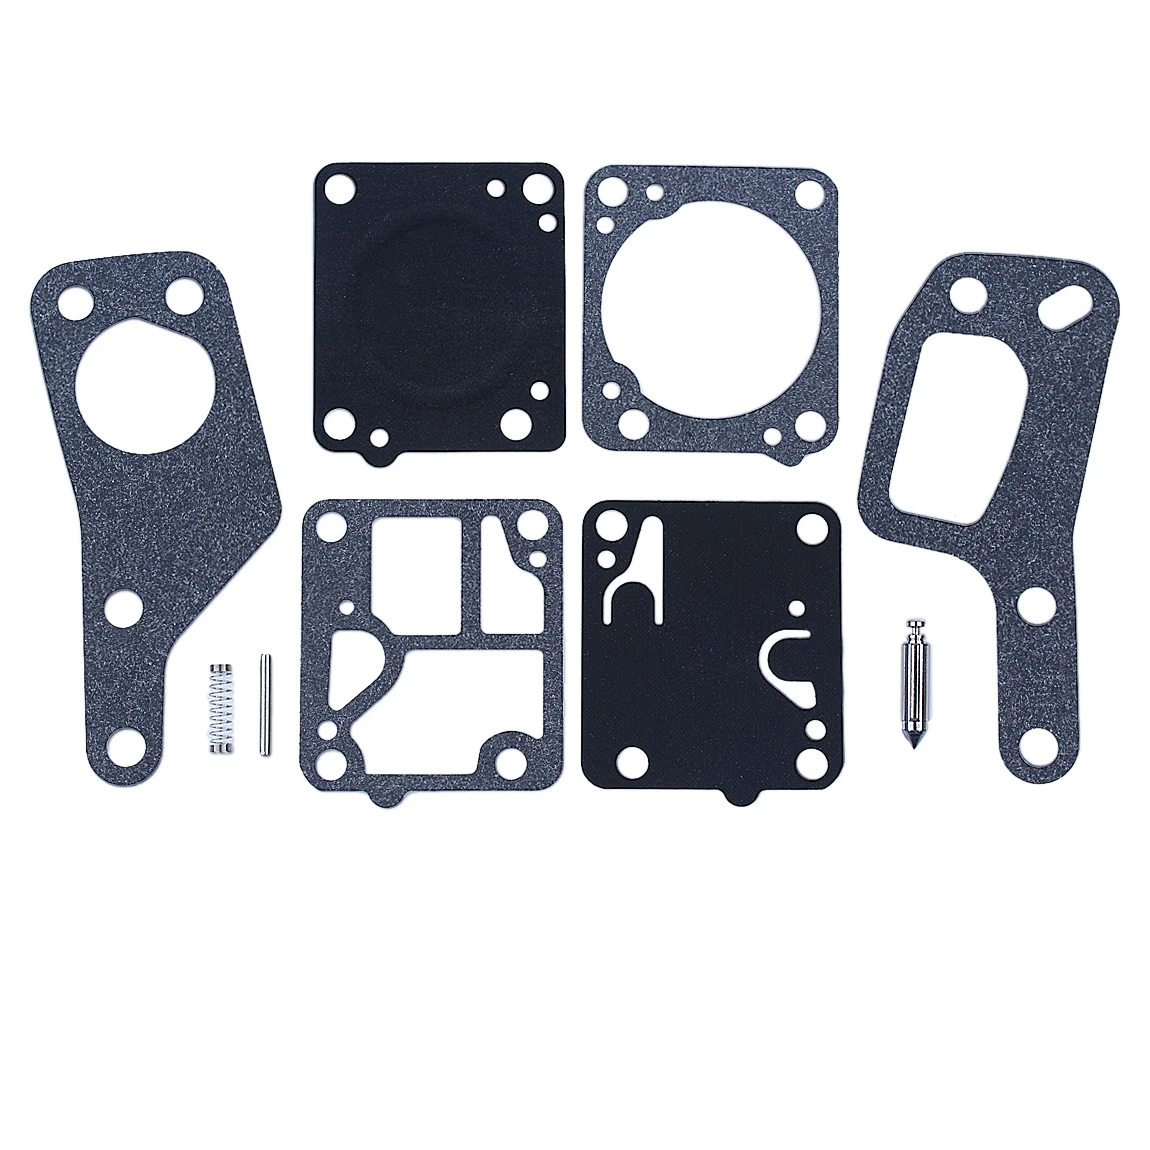 Carburetor Gasket Repair Kit Fit for McCulloch Mini Mac 110 120 130 140 Chainsaw Replacement Parts for Zama RB19 M1 M7